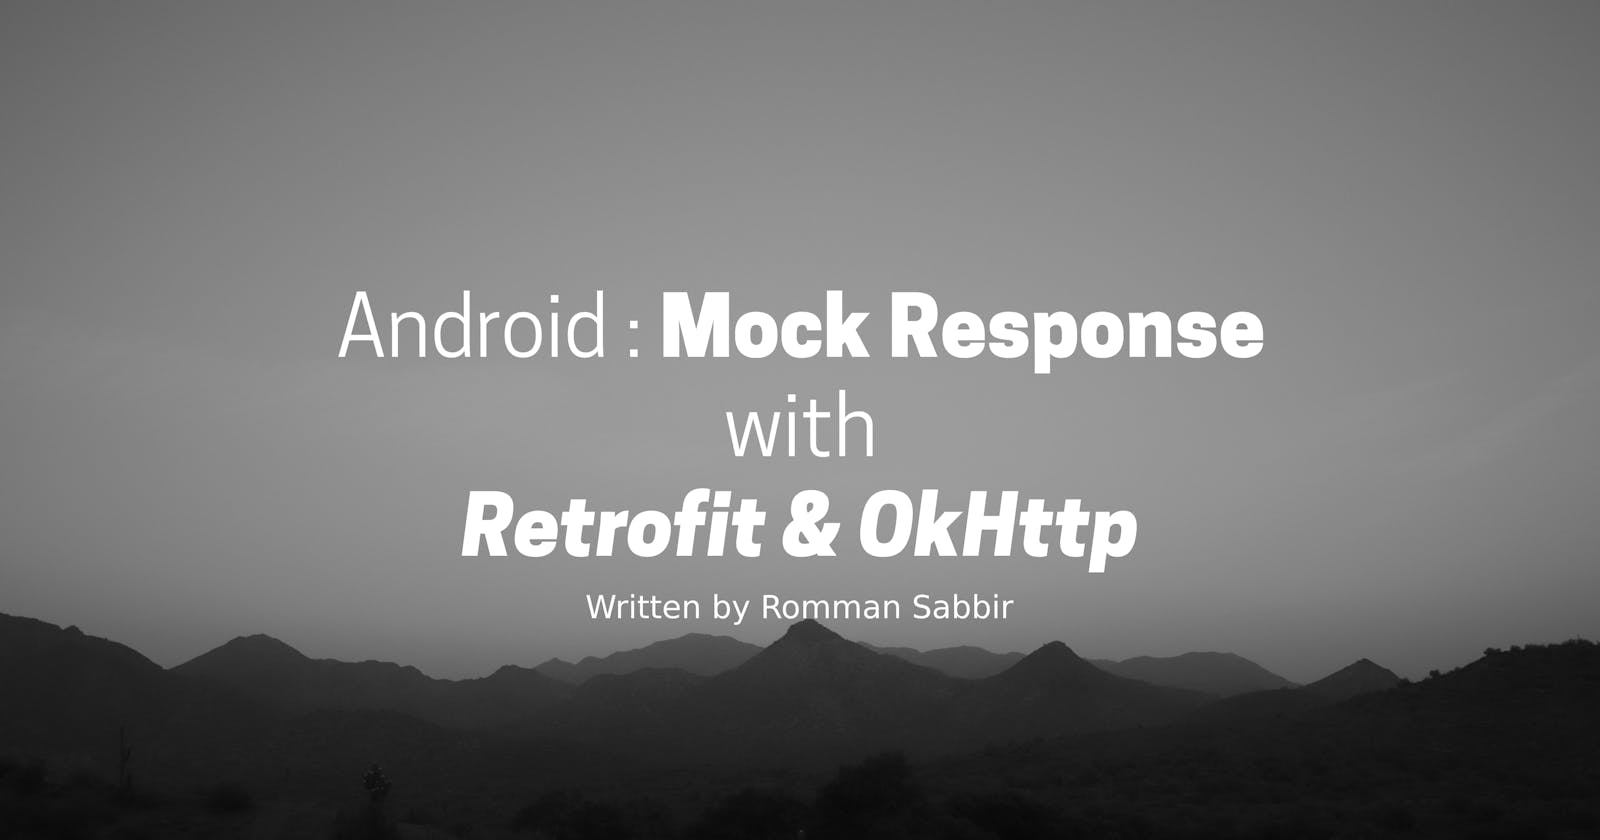 Android : Mock Response with Retrofit & OkHttp